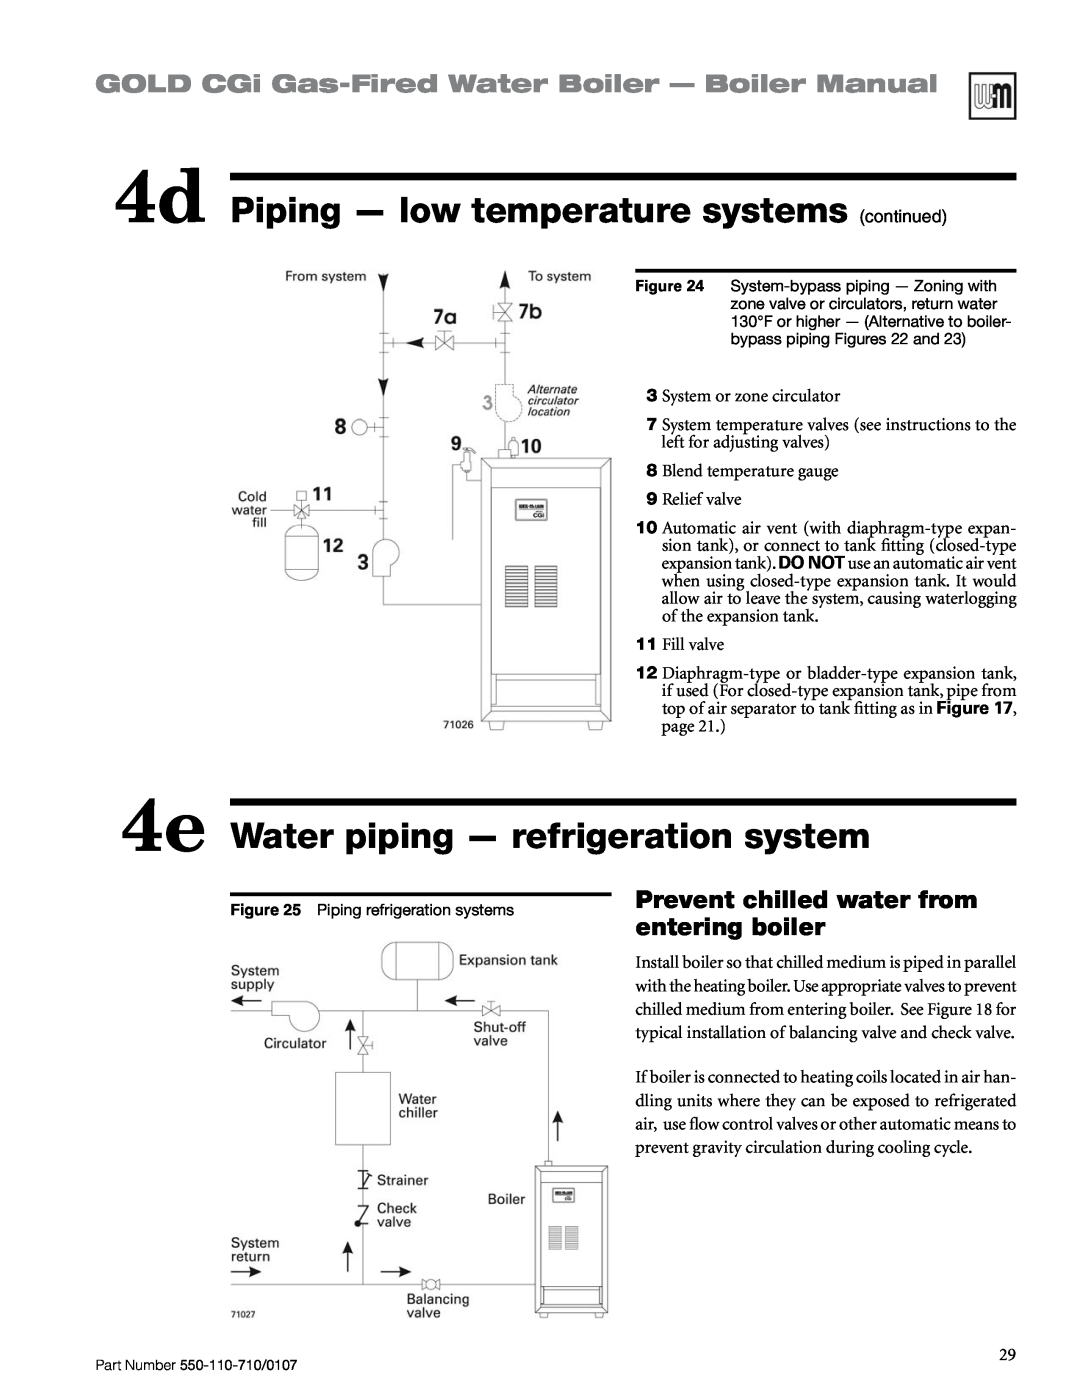 Weil-McLain Series 2 manual 4e Water piping — refrigeration system, 4d Piping — low temperature systems continued 